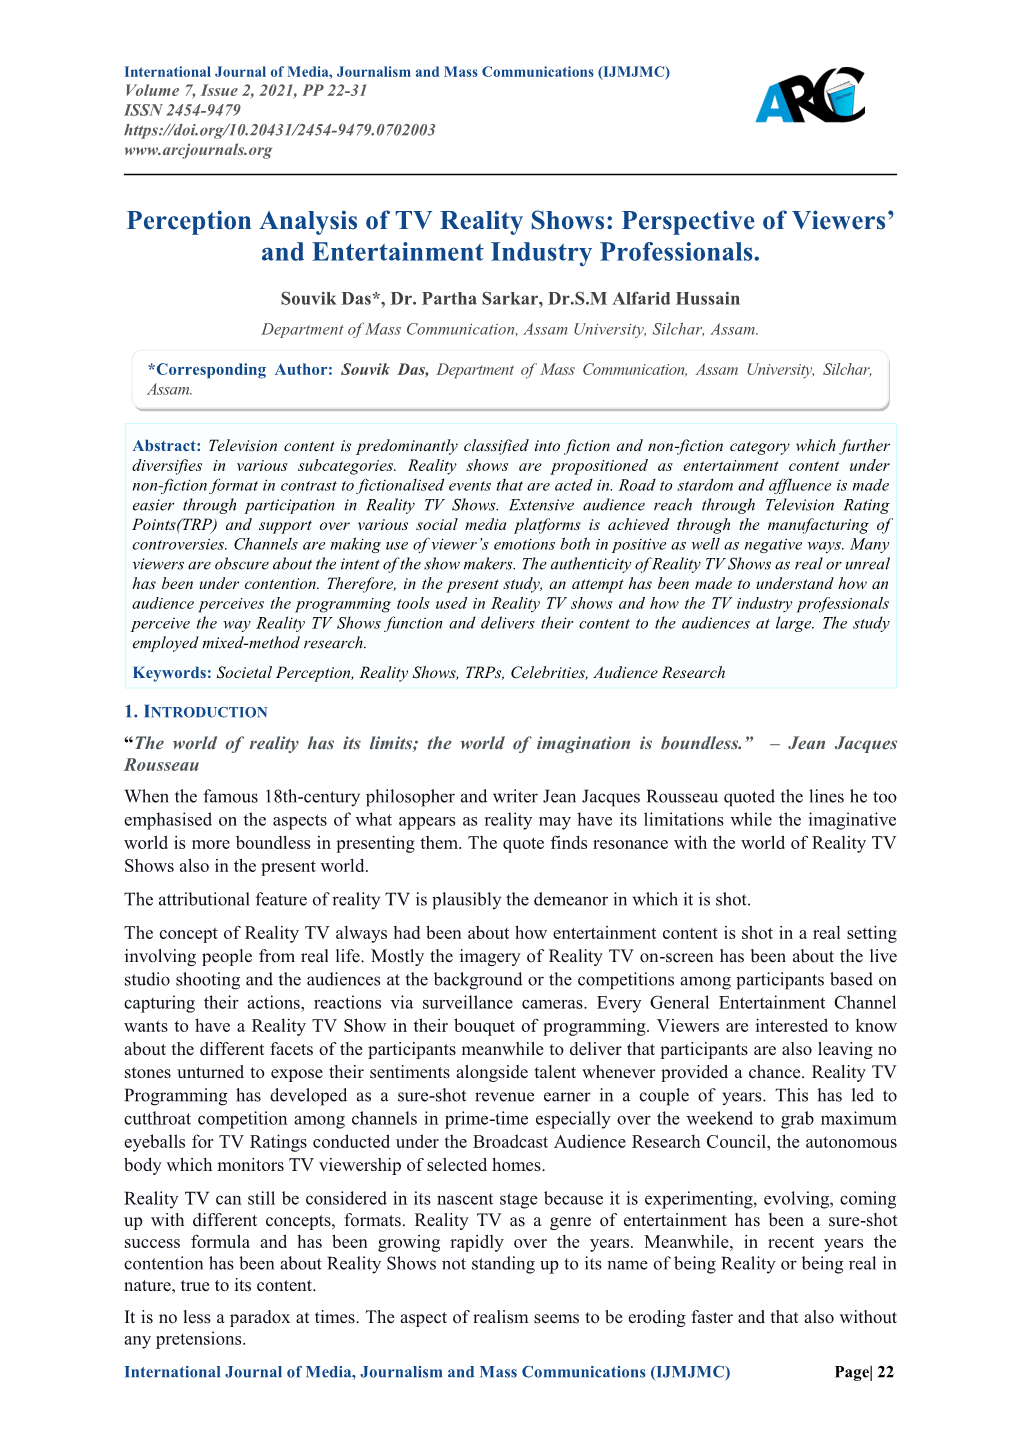 Perception Analysis of TV Reality Shows: Perspective of Viewers’ and Entertainment Industry Professionals